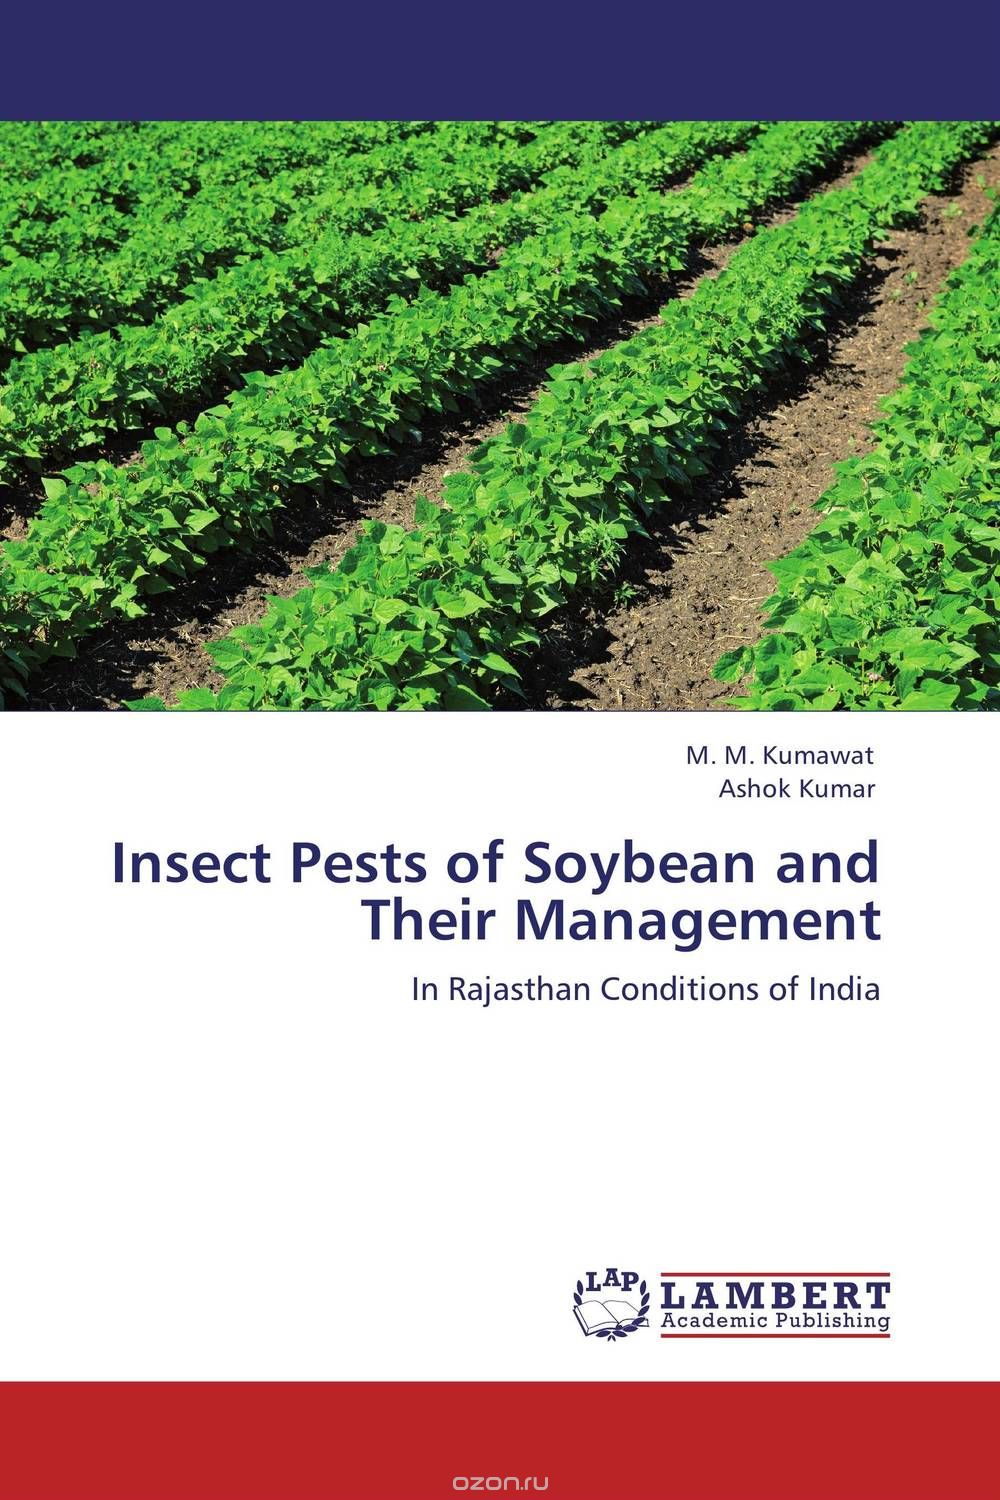 Скачать книгу "Insect Pests of Soybean and Their Management"